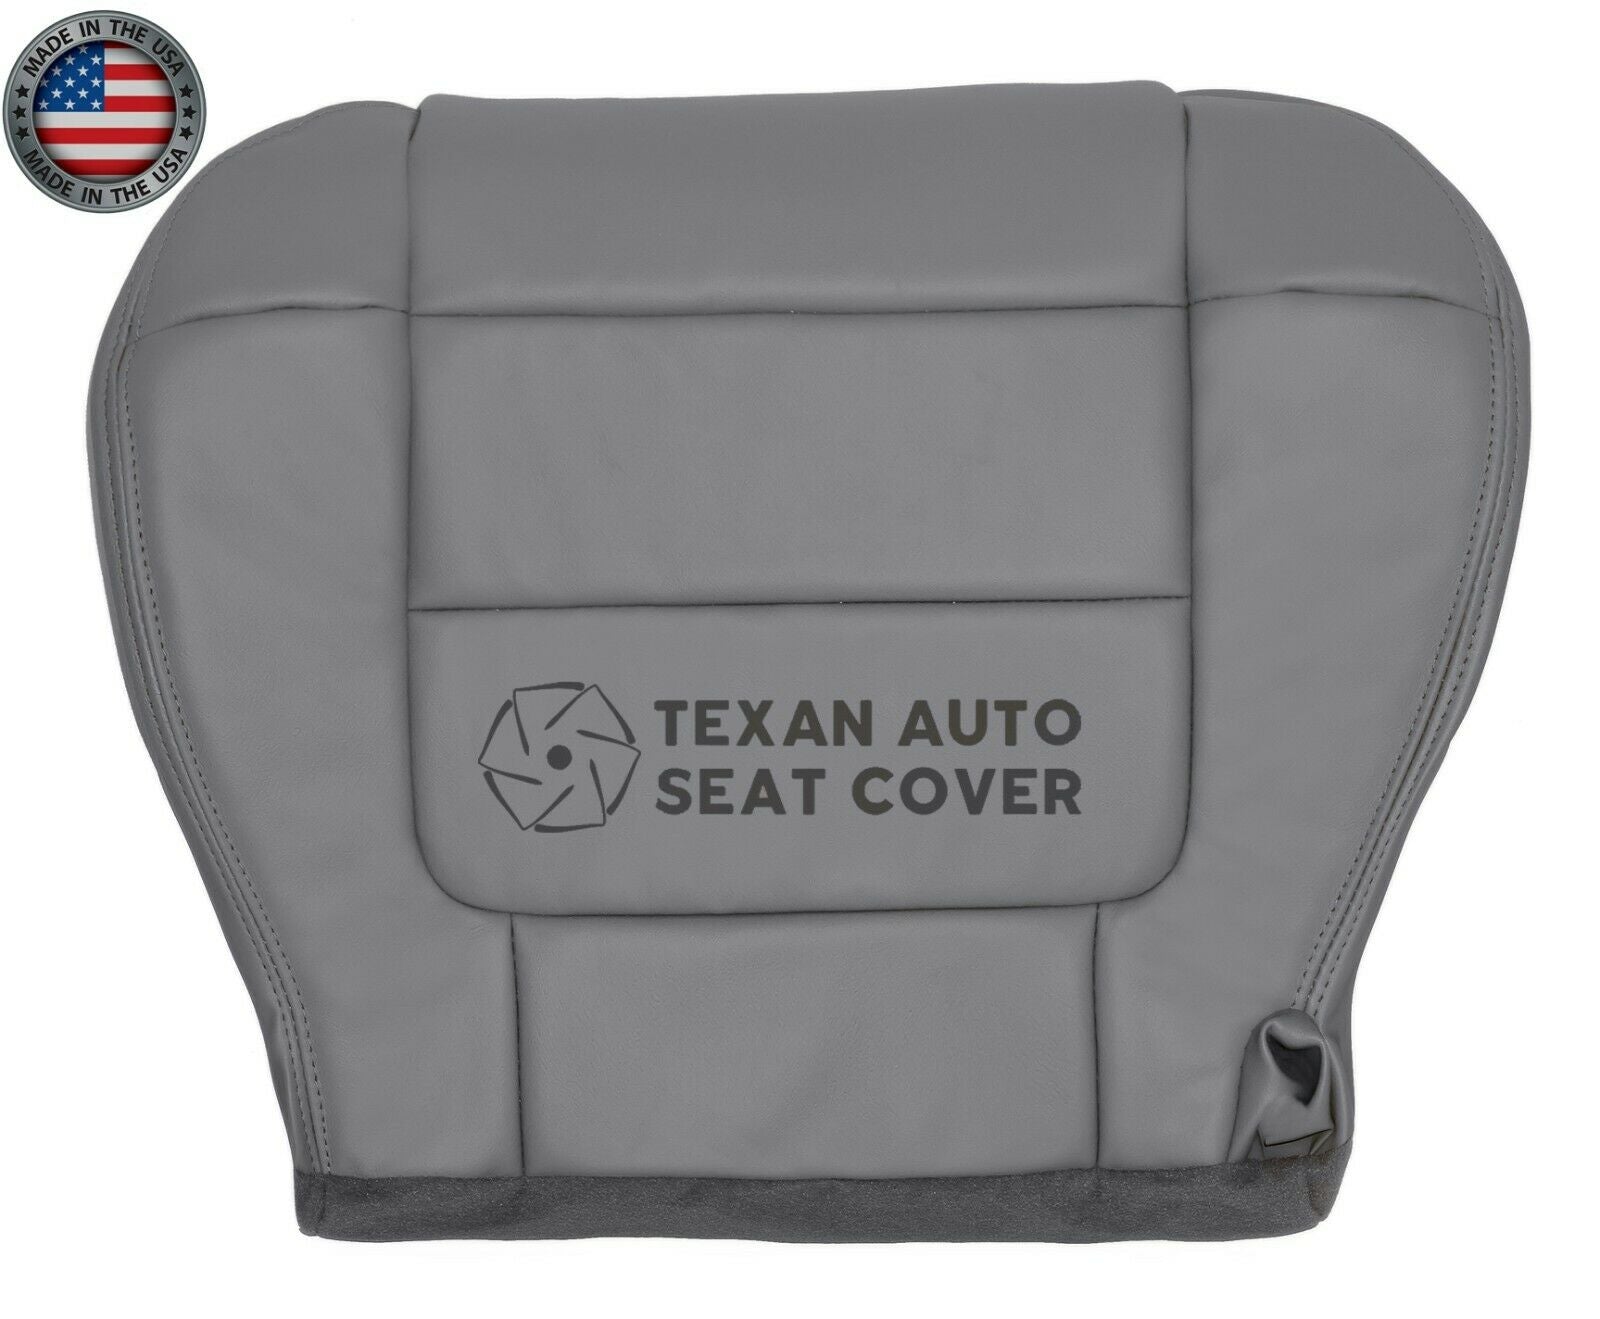 2001, 2002 Ford F150 Lariat Passenger Bottom Leather Seat Cover Gray